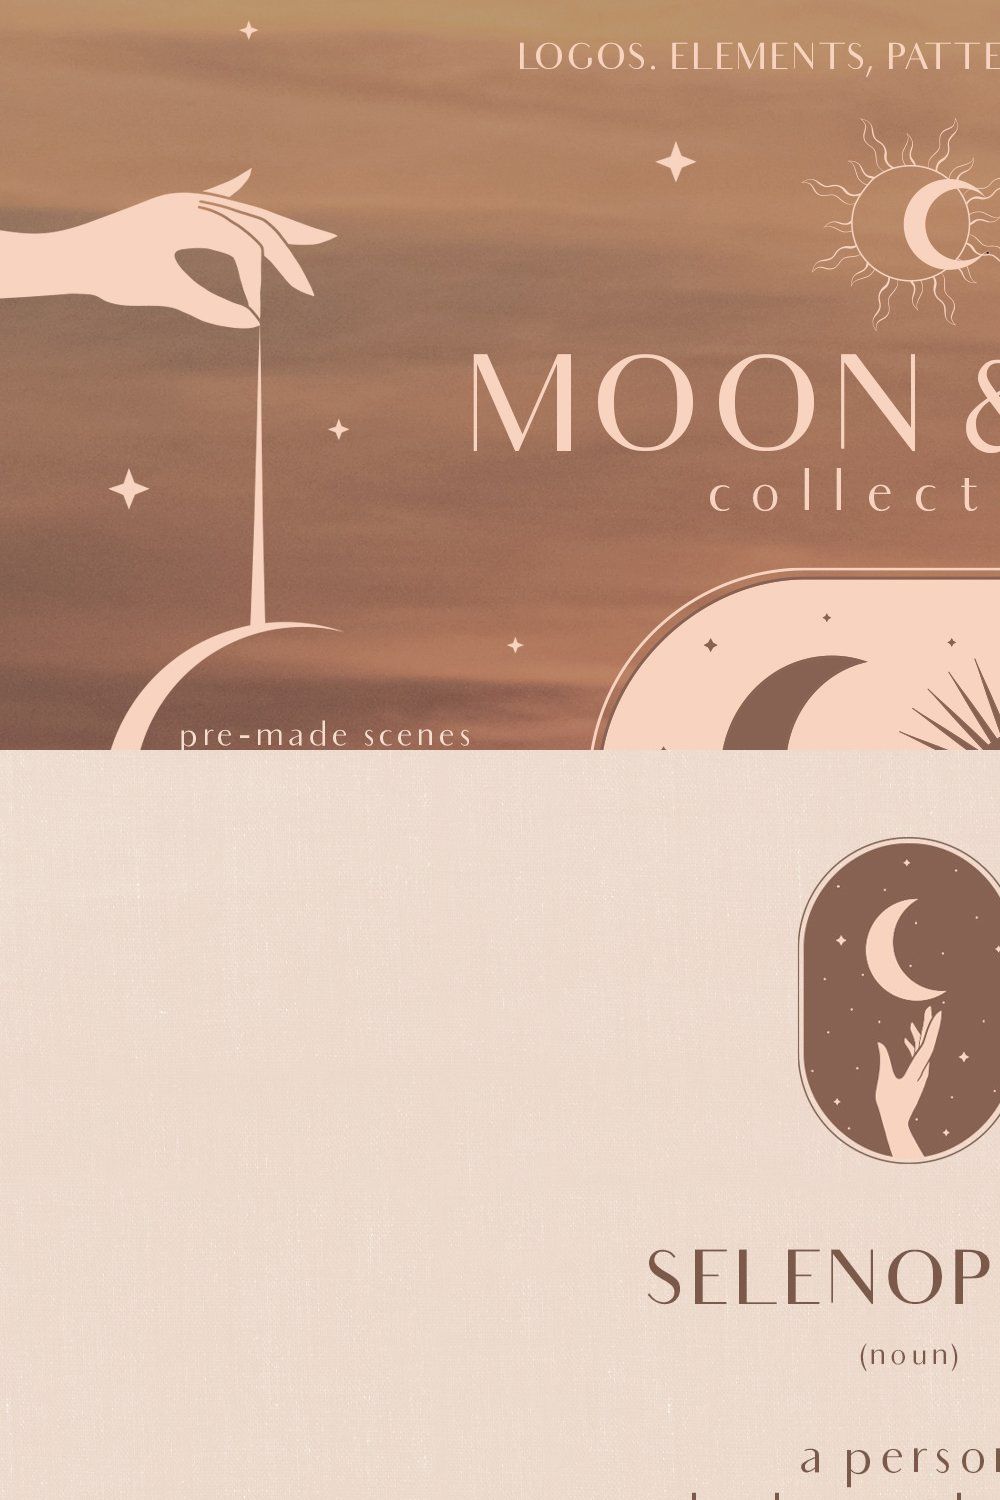 Moon and sun collection pinterest preview image.